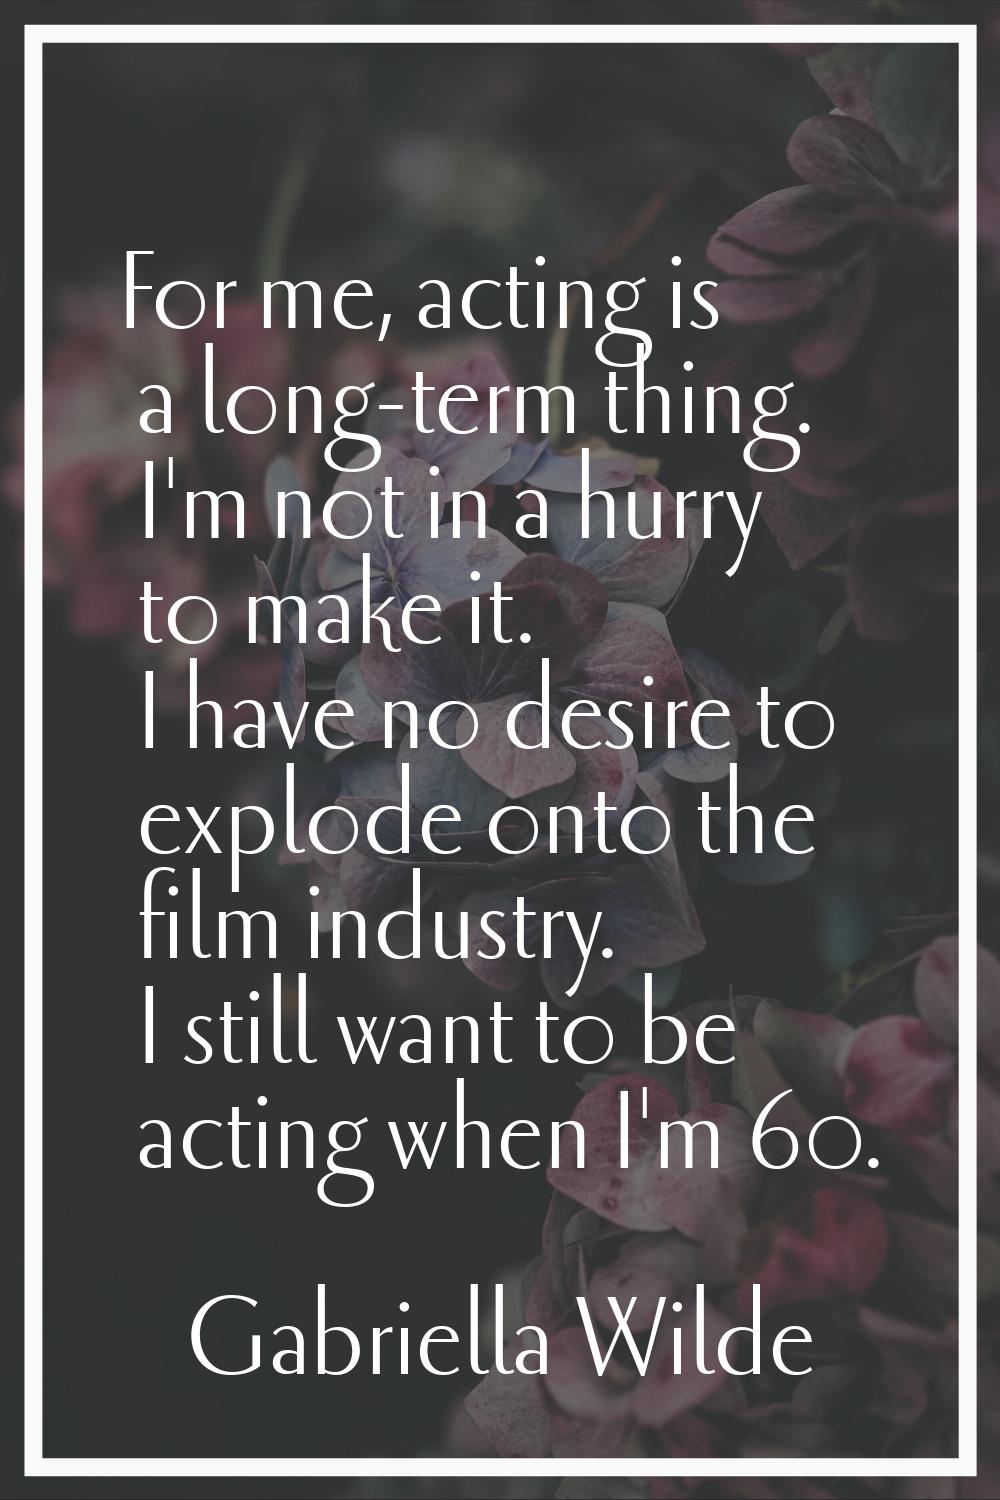 For me, acting is a long-term thing. I'm not in a hurry to make it. I have no desire to explode ont